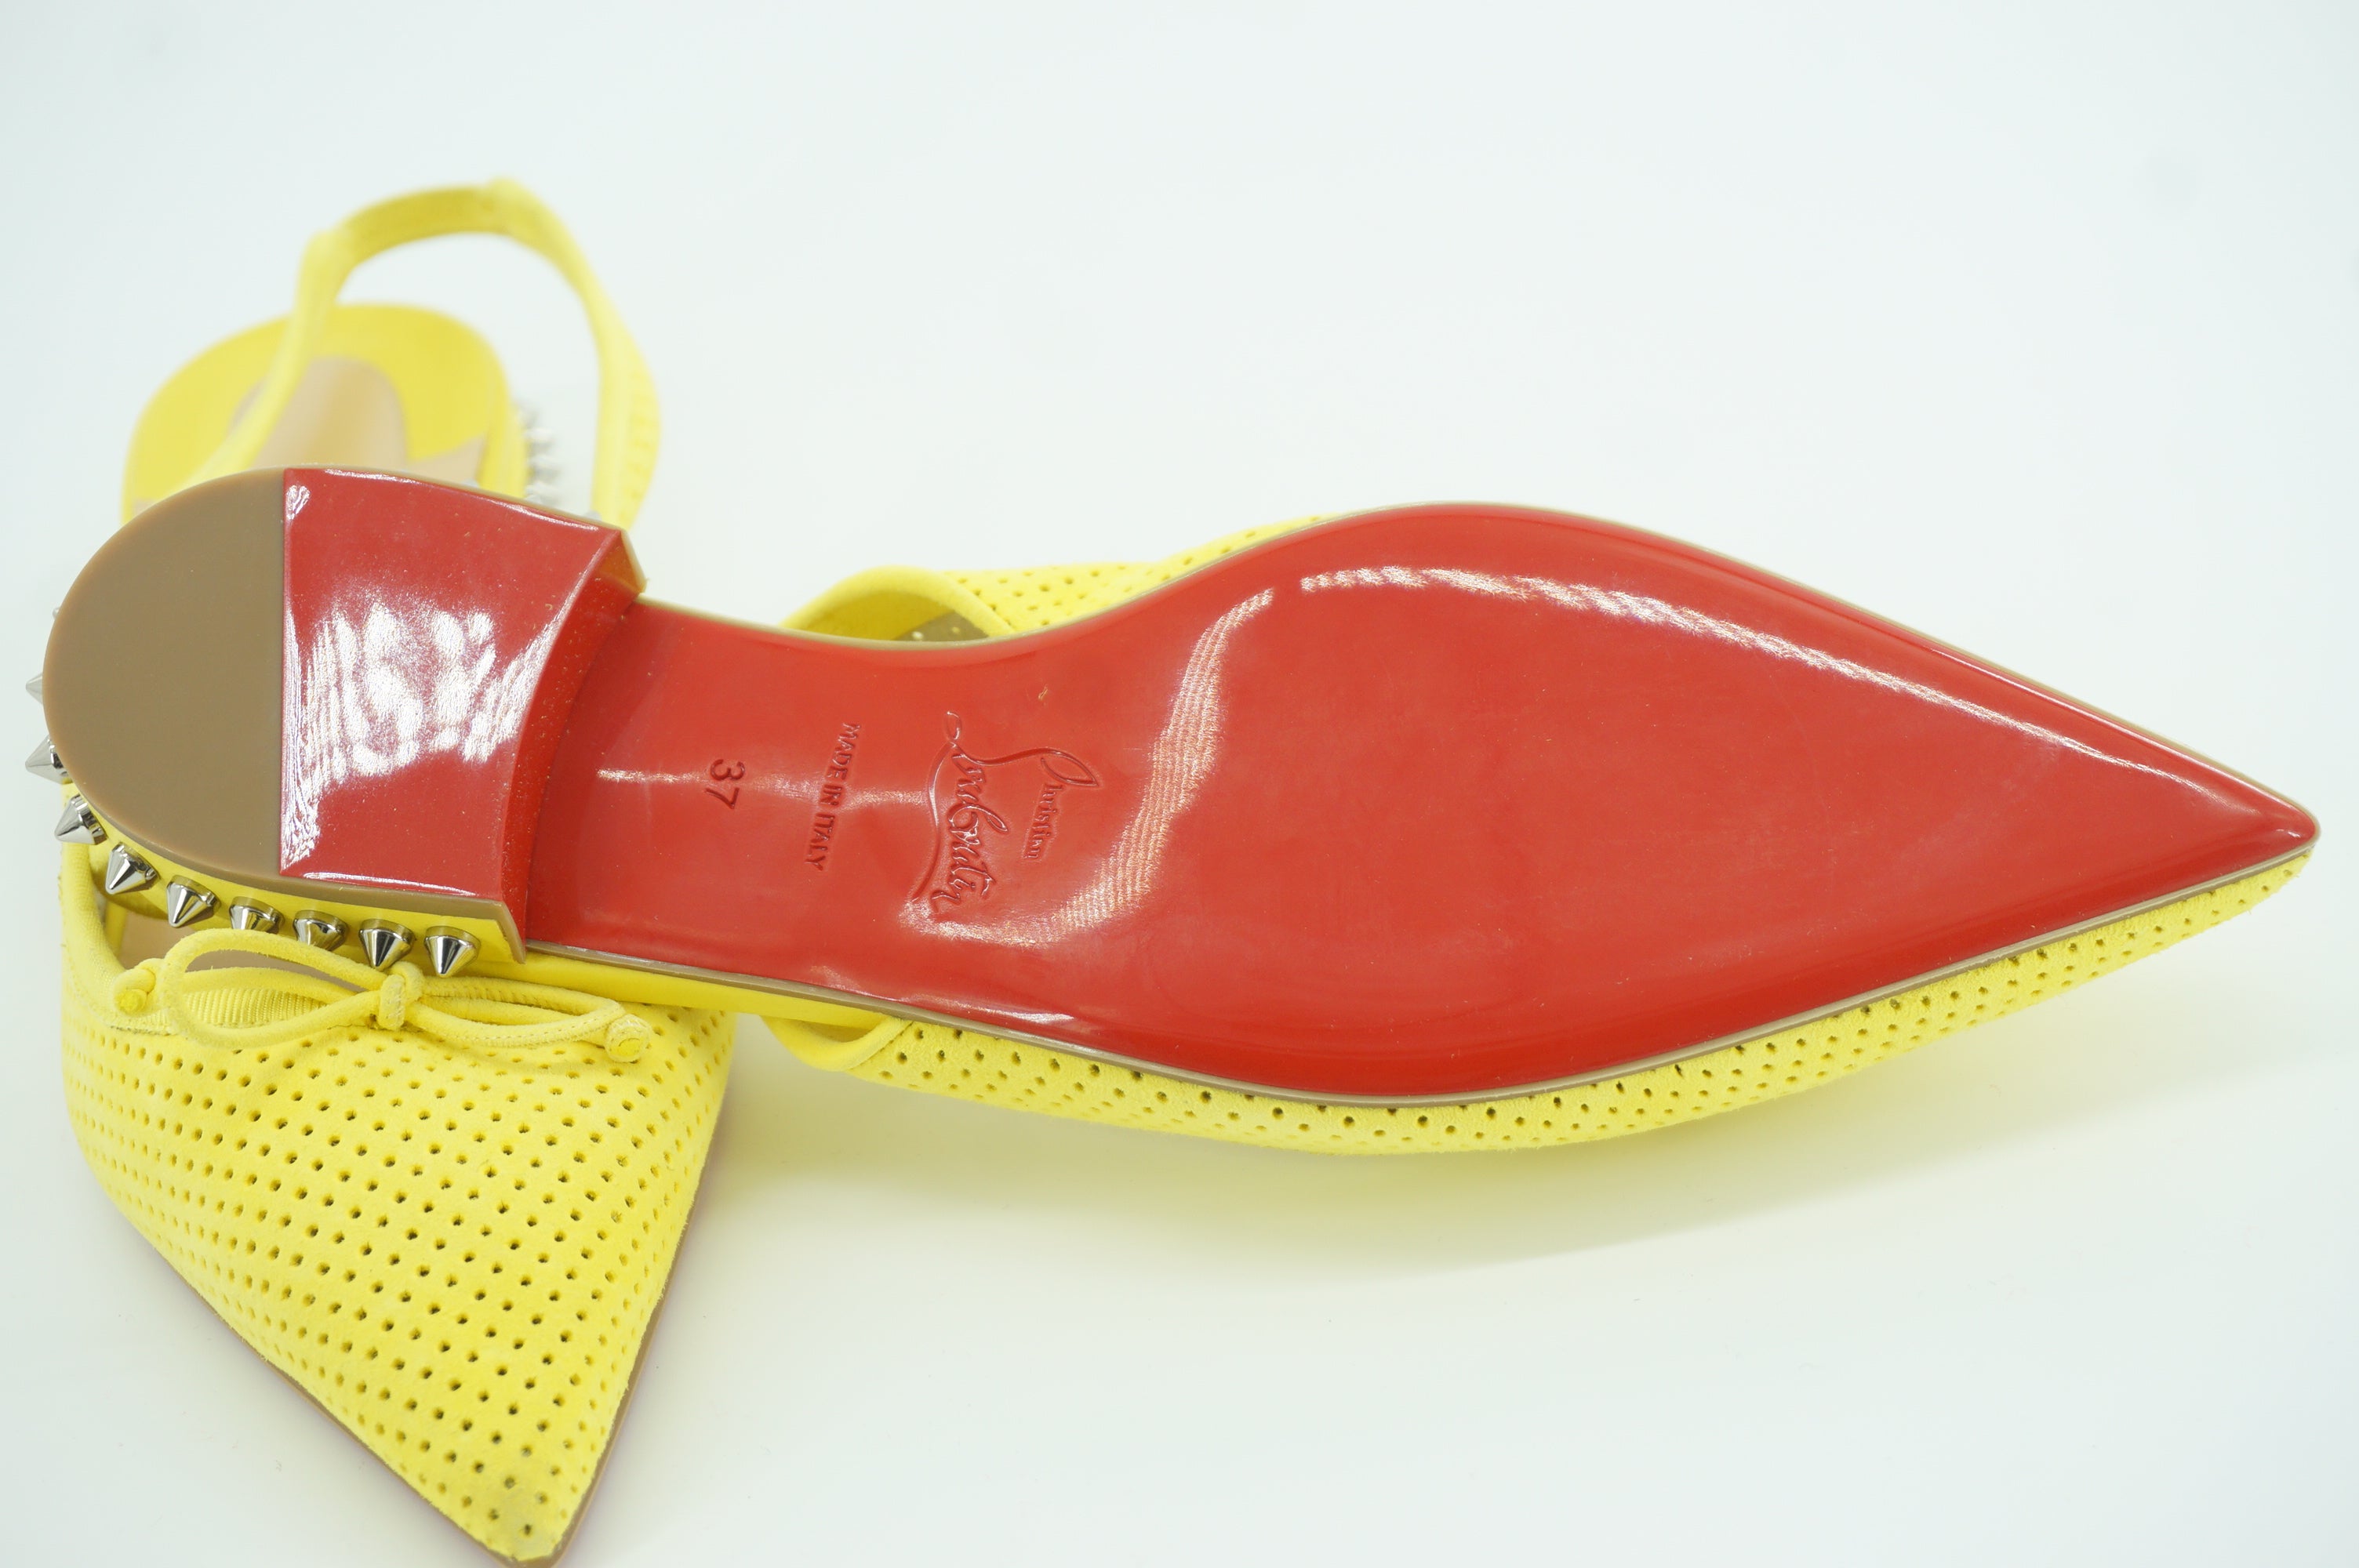 Christian Louboutin Hall Pointy Toe Slingback Ballet Flat Size 37 Spiked Suede